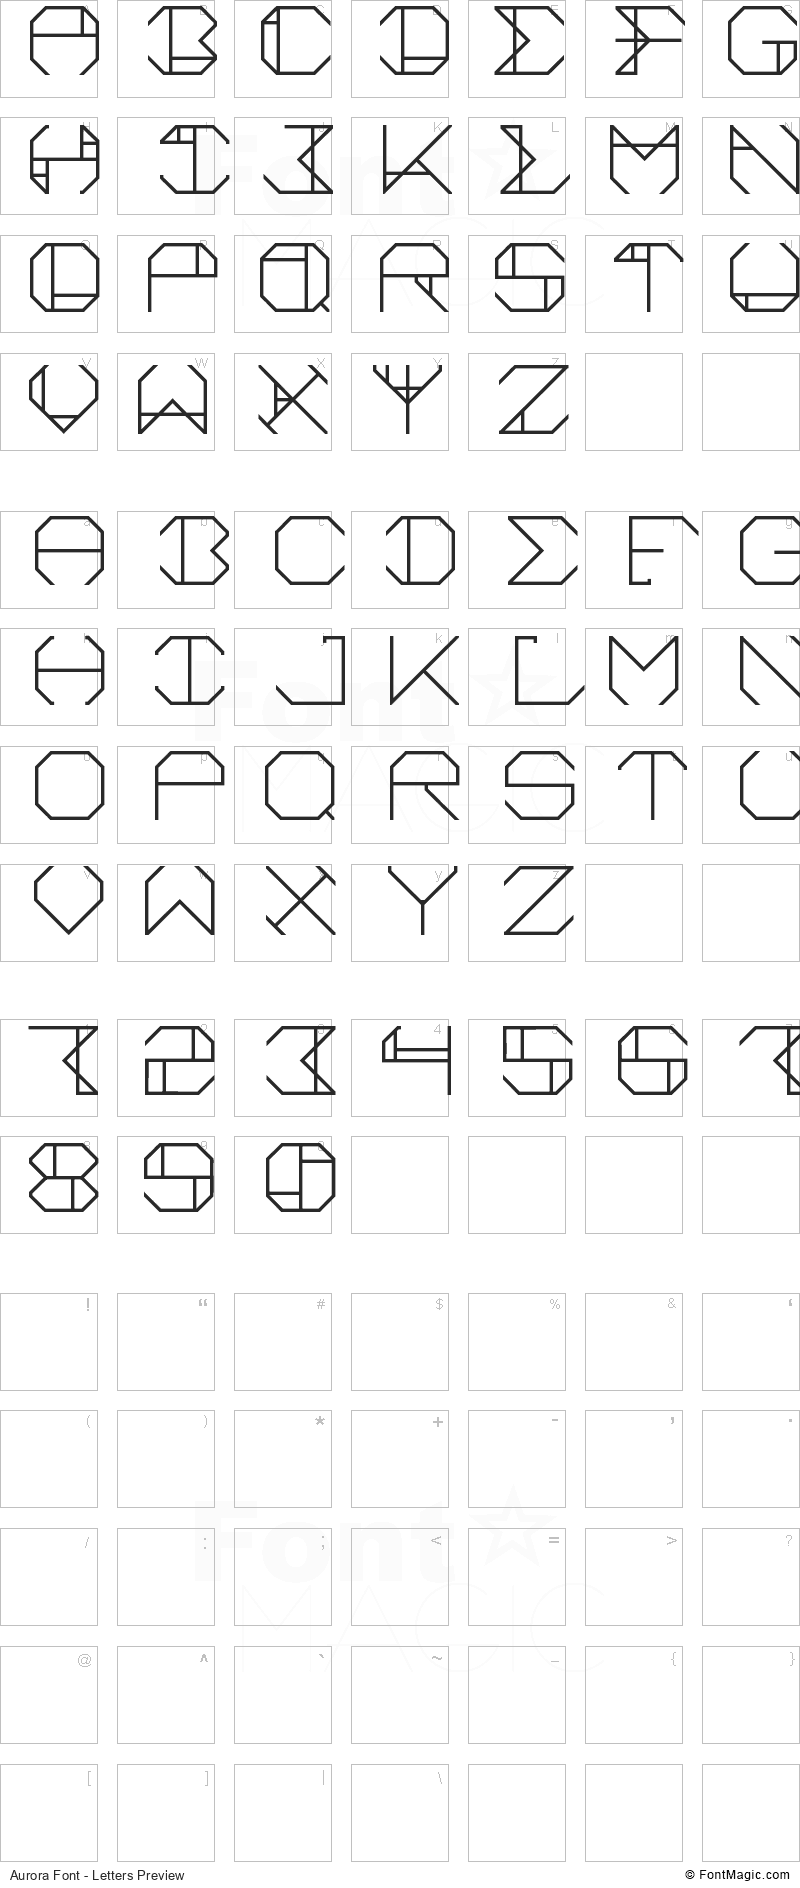 Aurora Font - All Latters Preview Chart